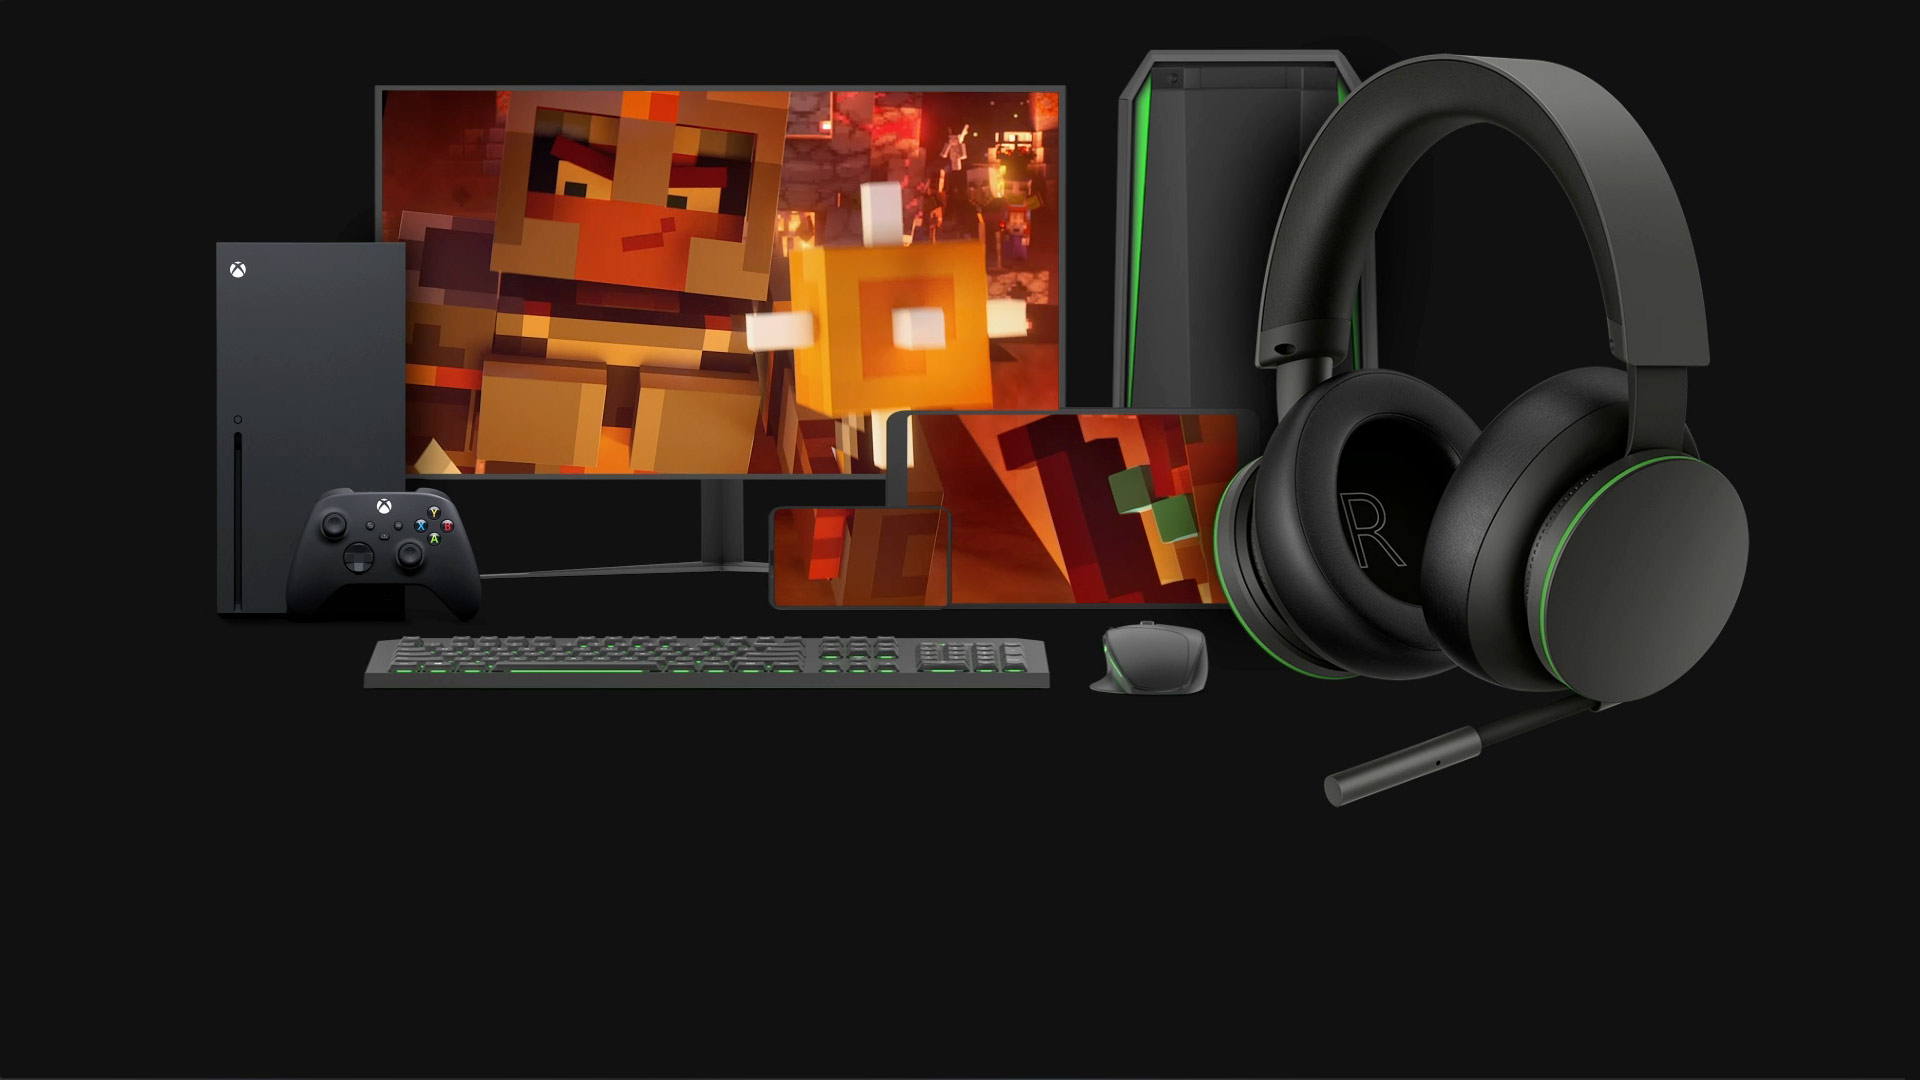 The Xbox Stereo Headset sits in front of a selection of devices it is compatible with, including the Xbox Series X, Windows PC, and a mobile device.